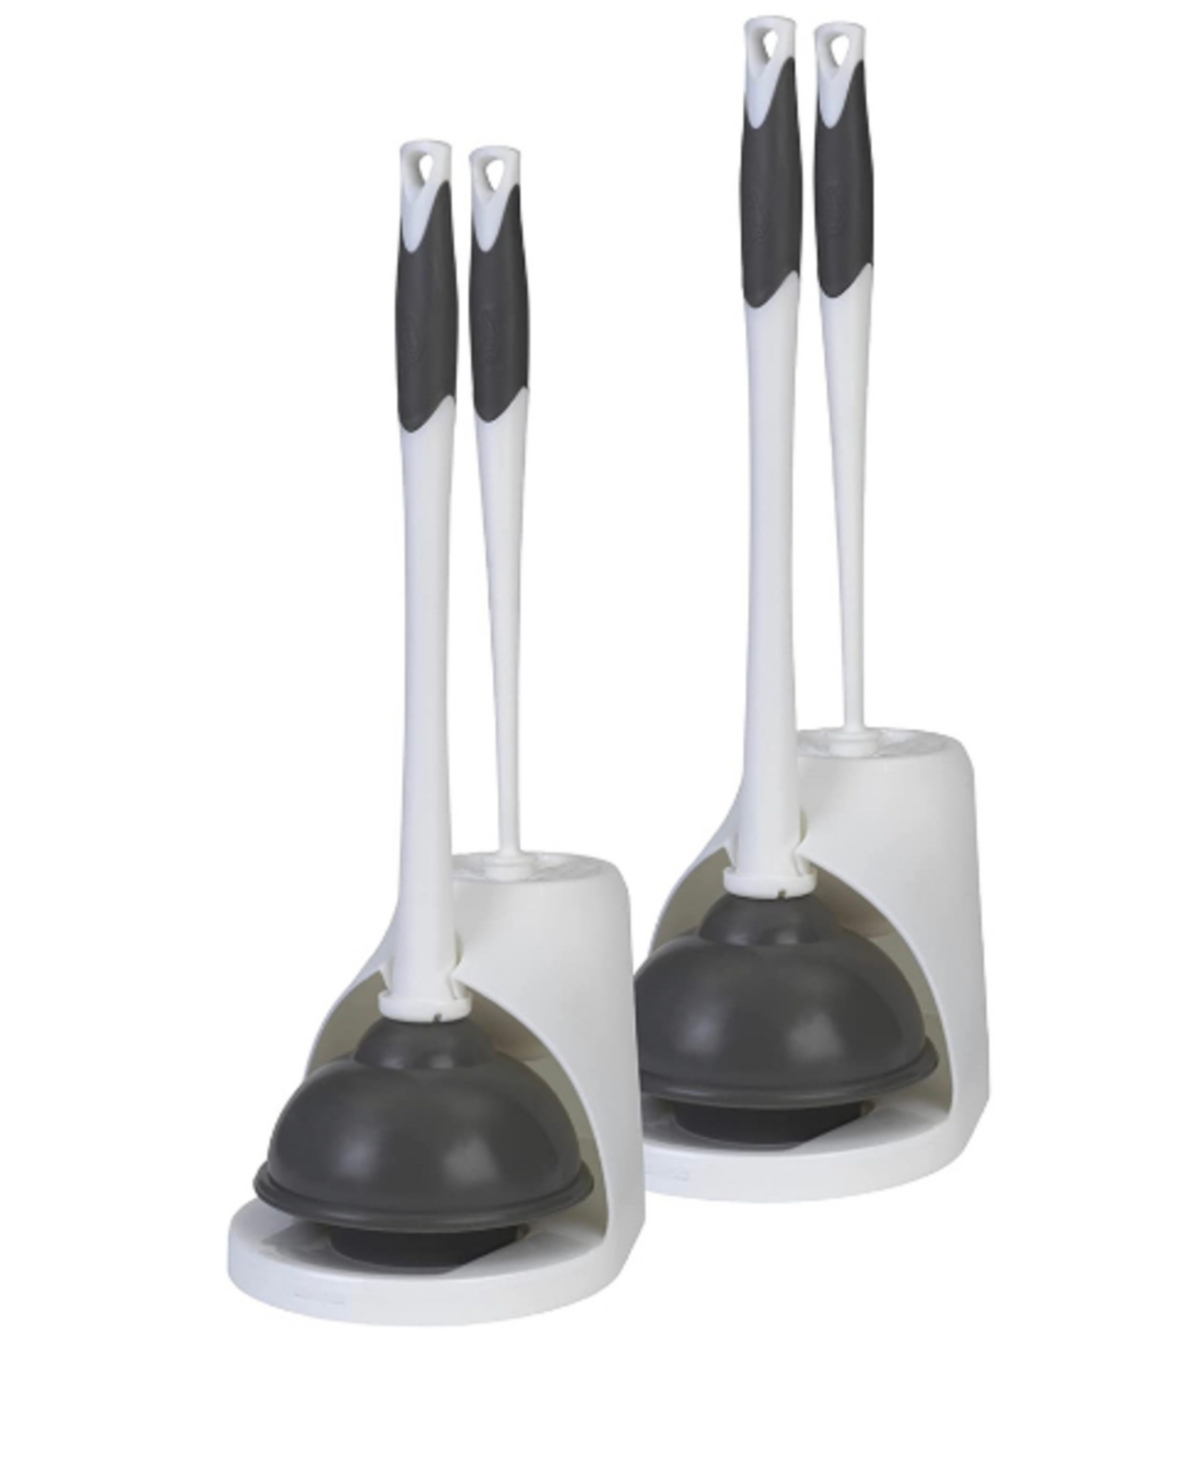 Clorox Two Pack Toilet Plunger And Hideaway Caddy In Gray And White